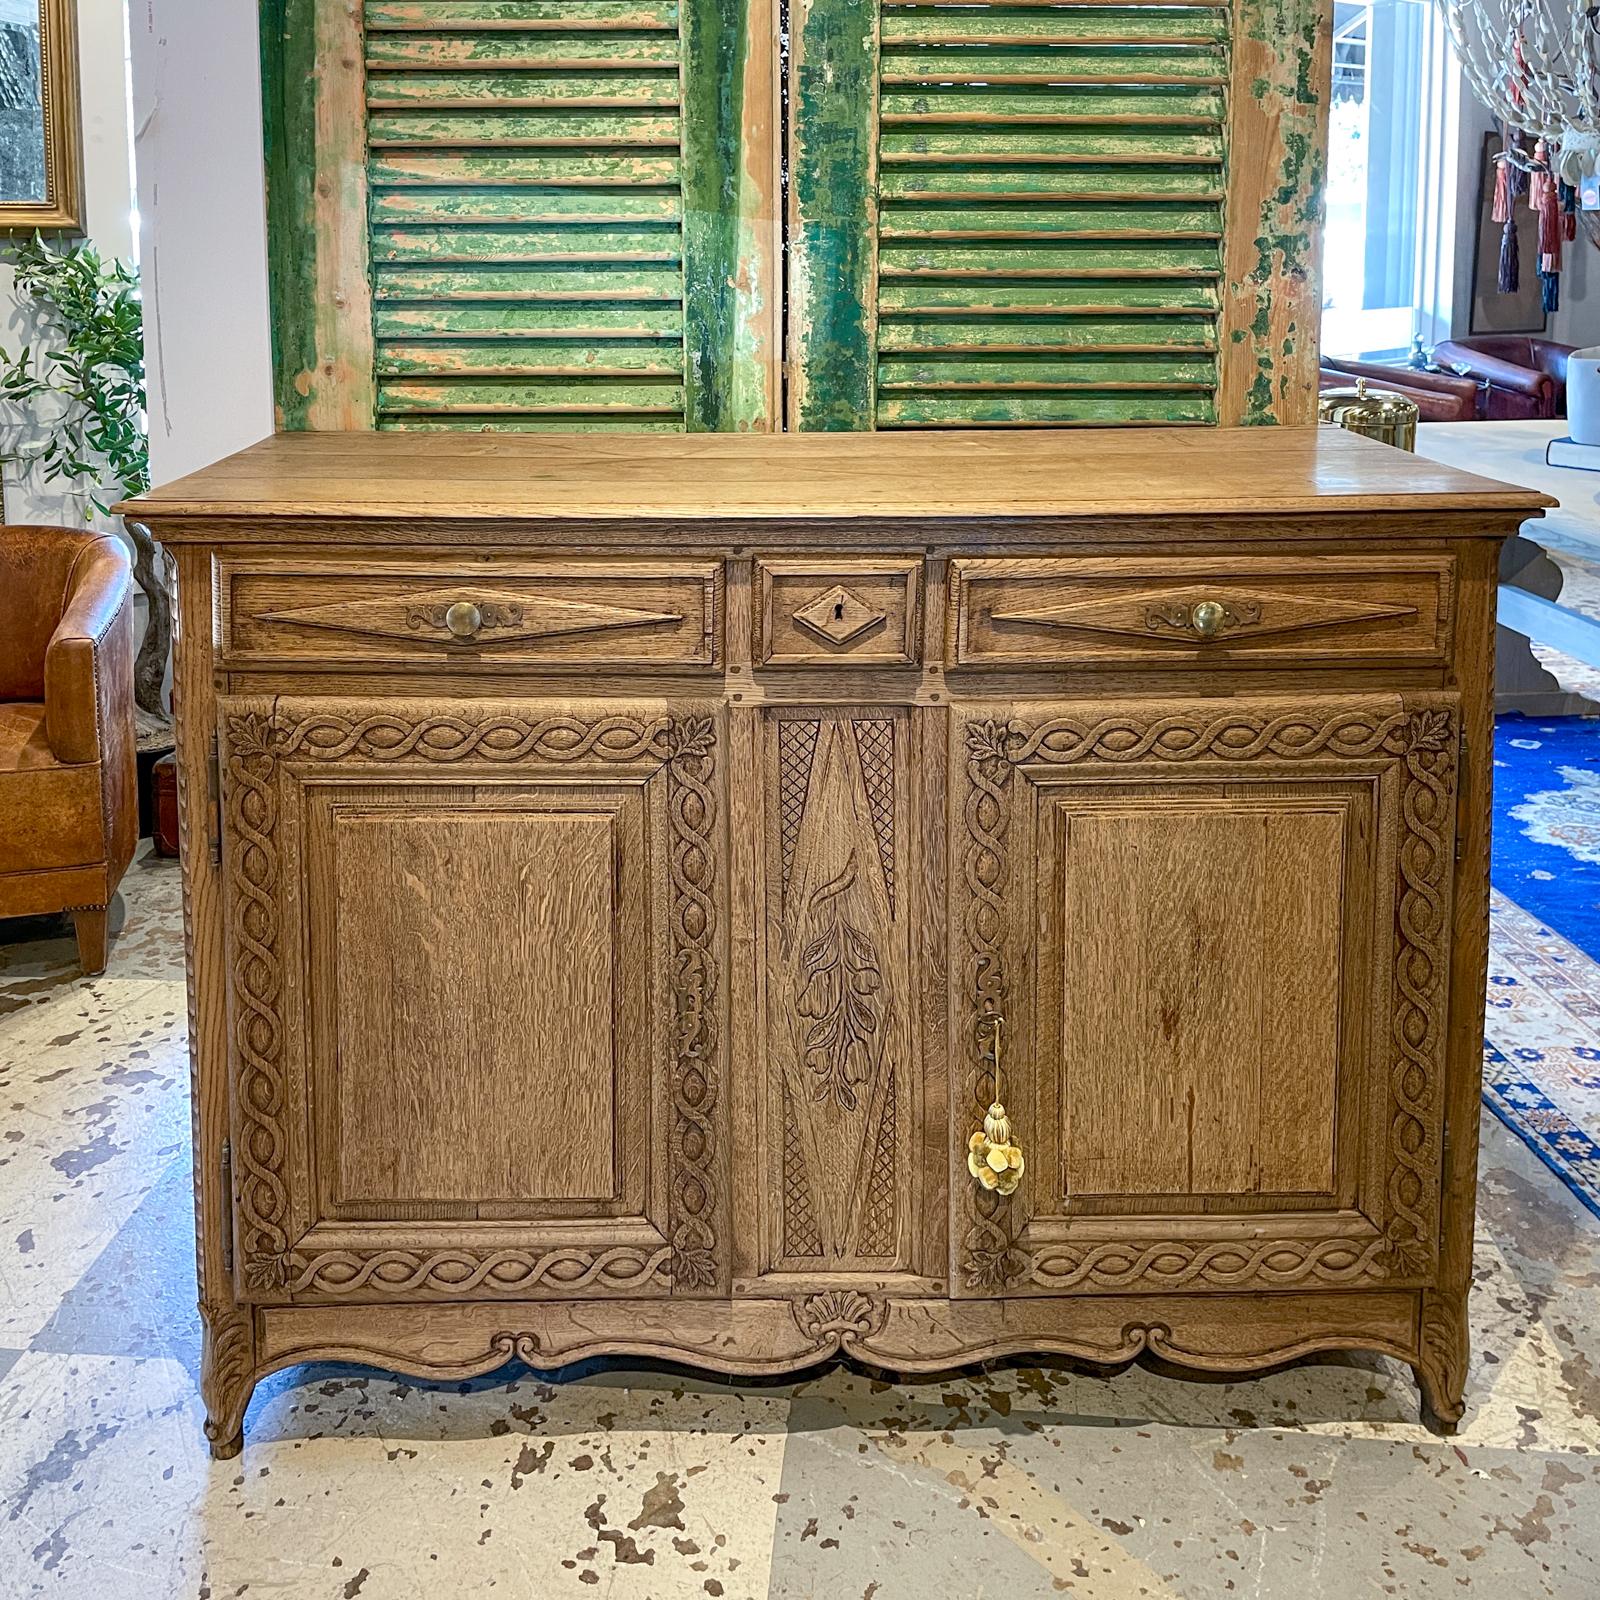 This antique French buffet is crafted in oak with three drawers and a lower cabinet with two doors. The front of the buffet has a number of carved details, including the shell at the center of the apron between the front legs. Between the doors is a